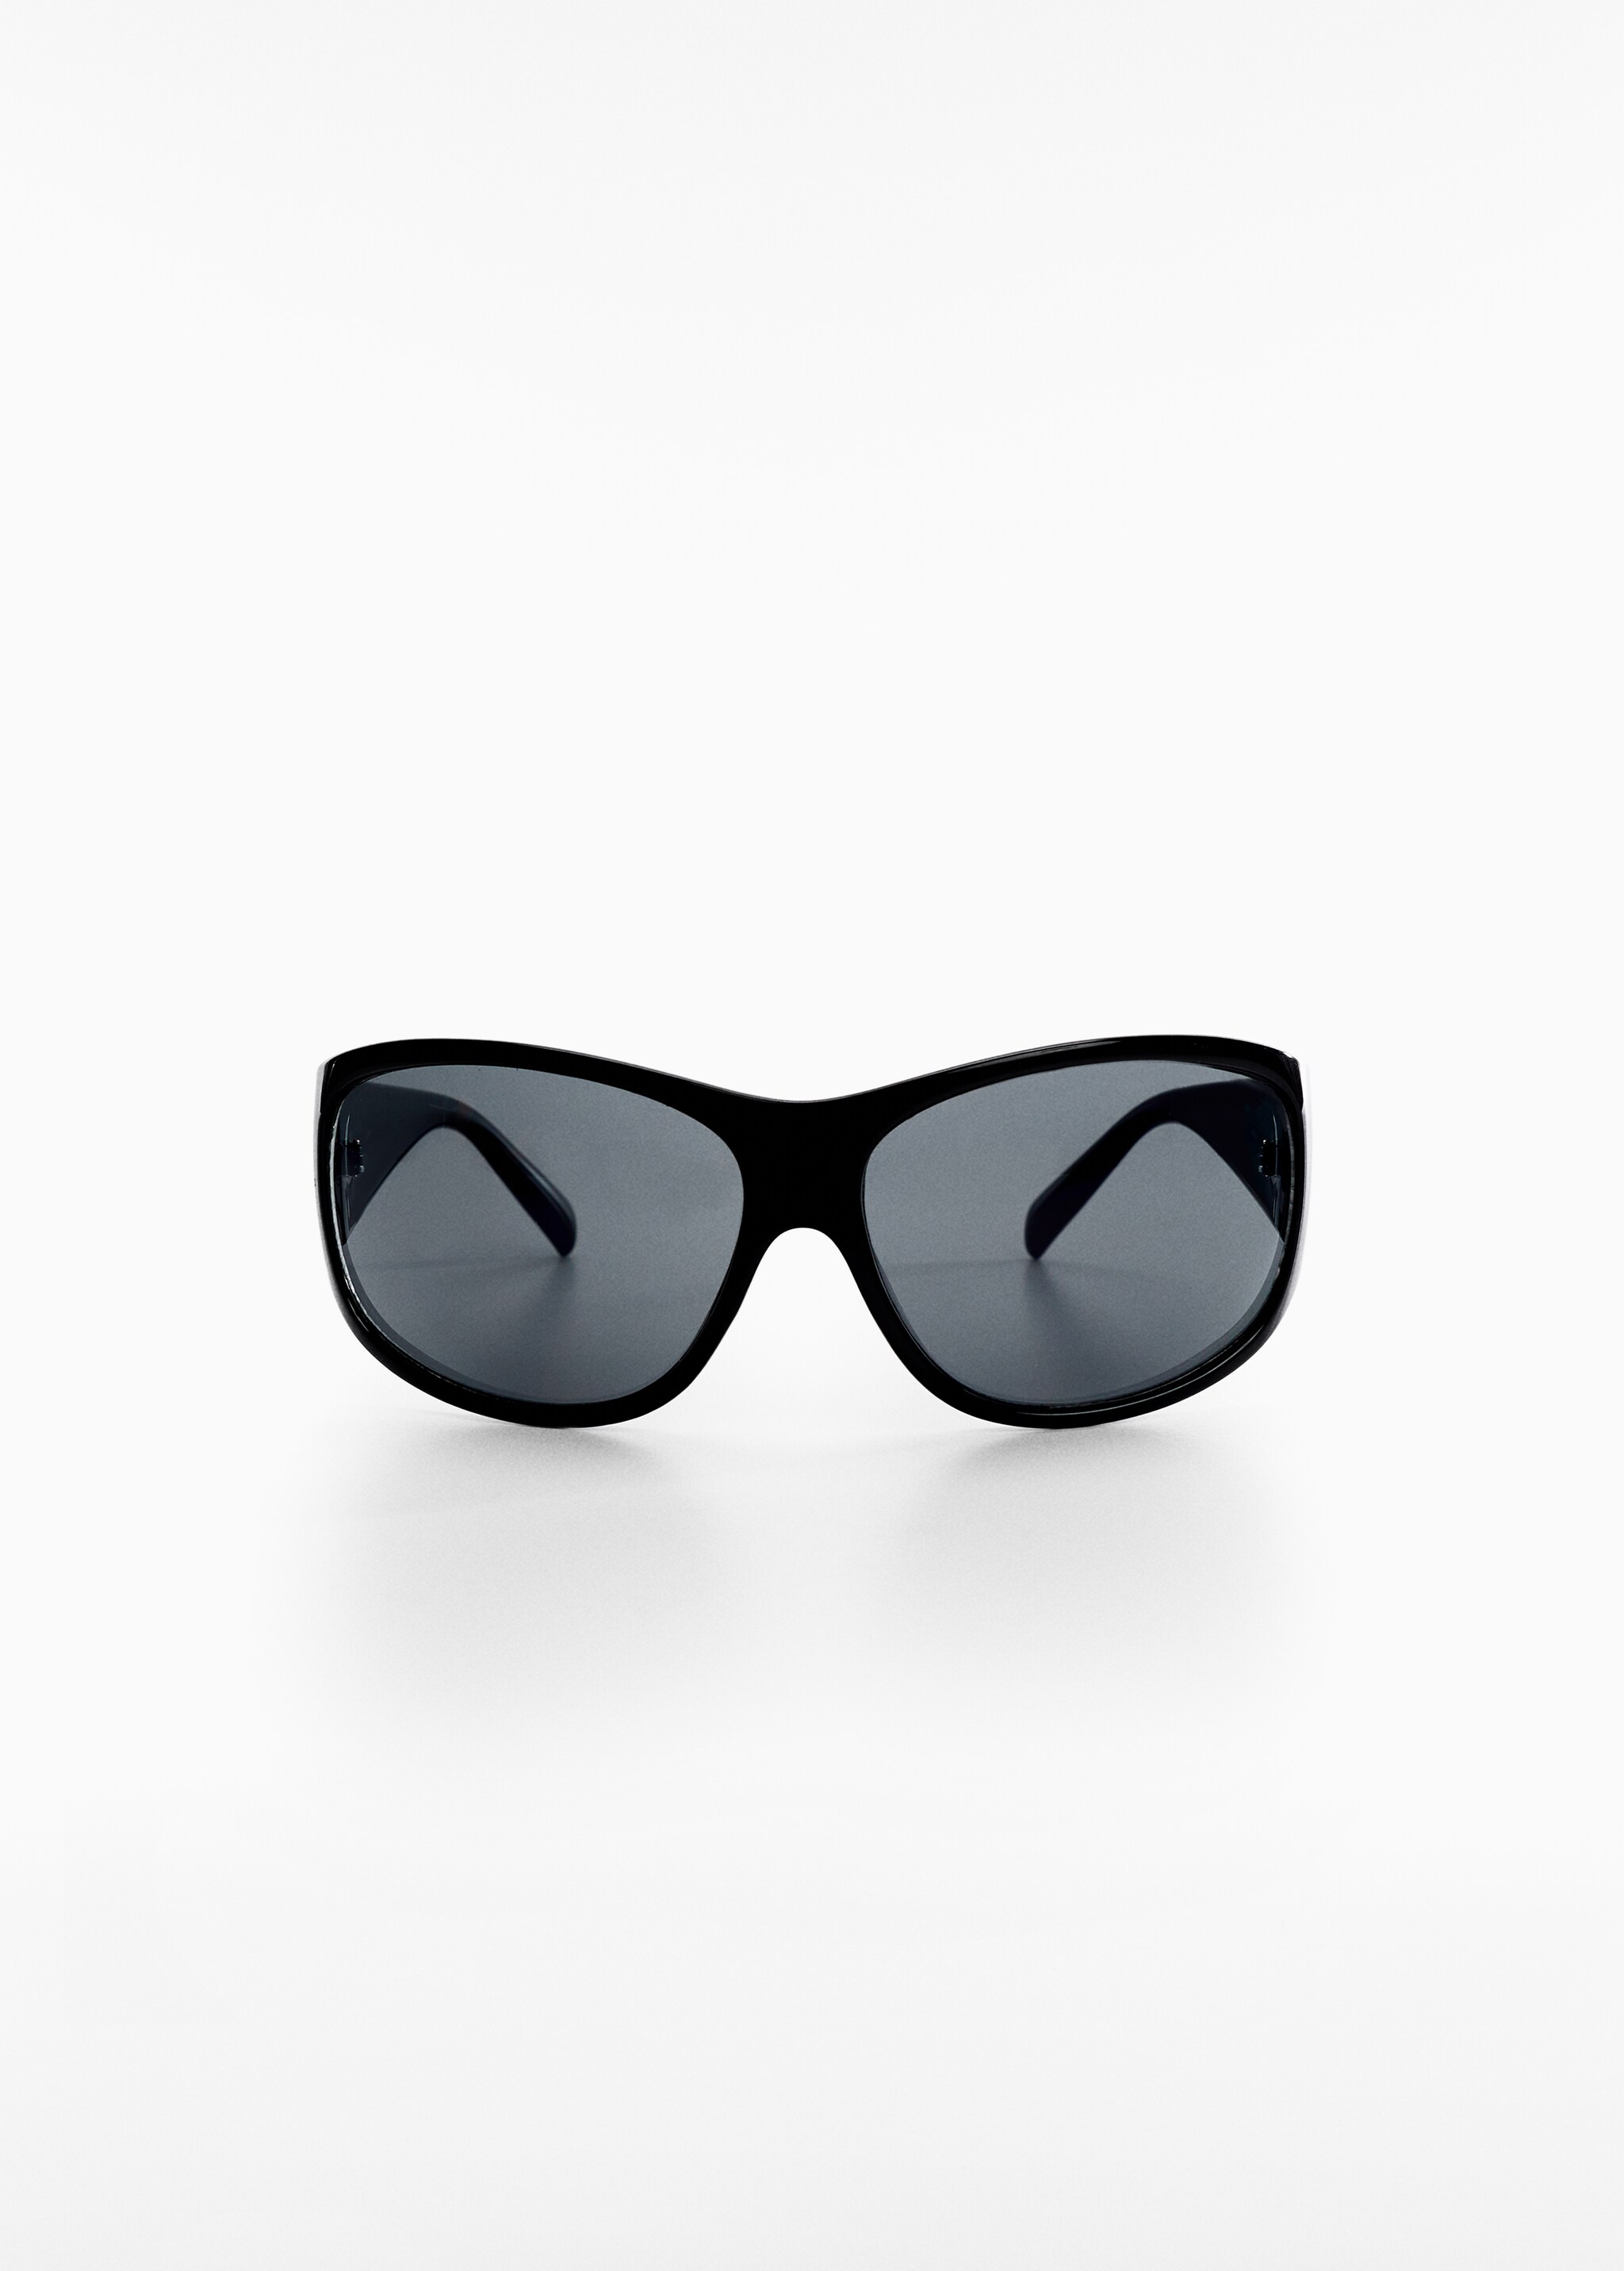 Curved frame sunglasses - Article without model